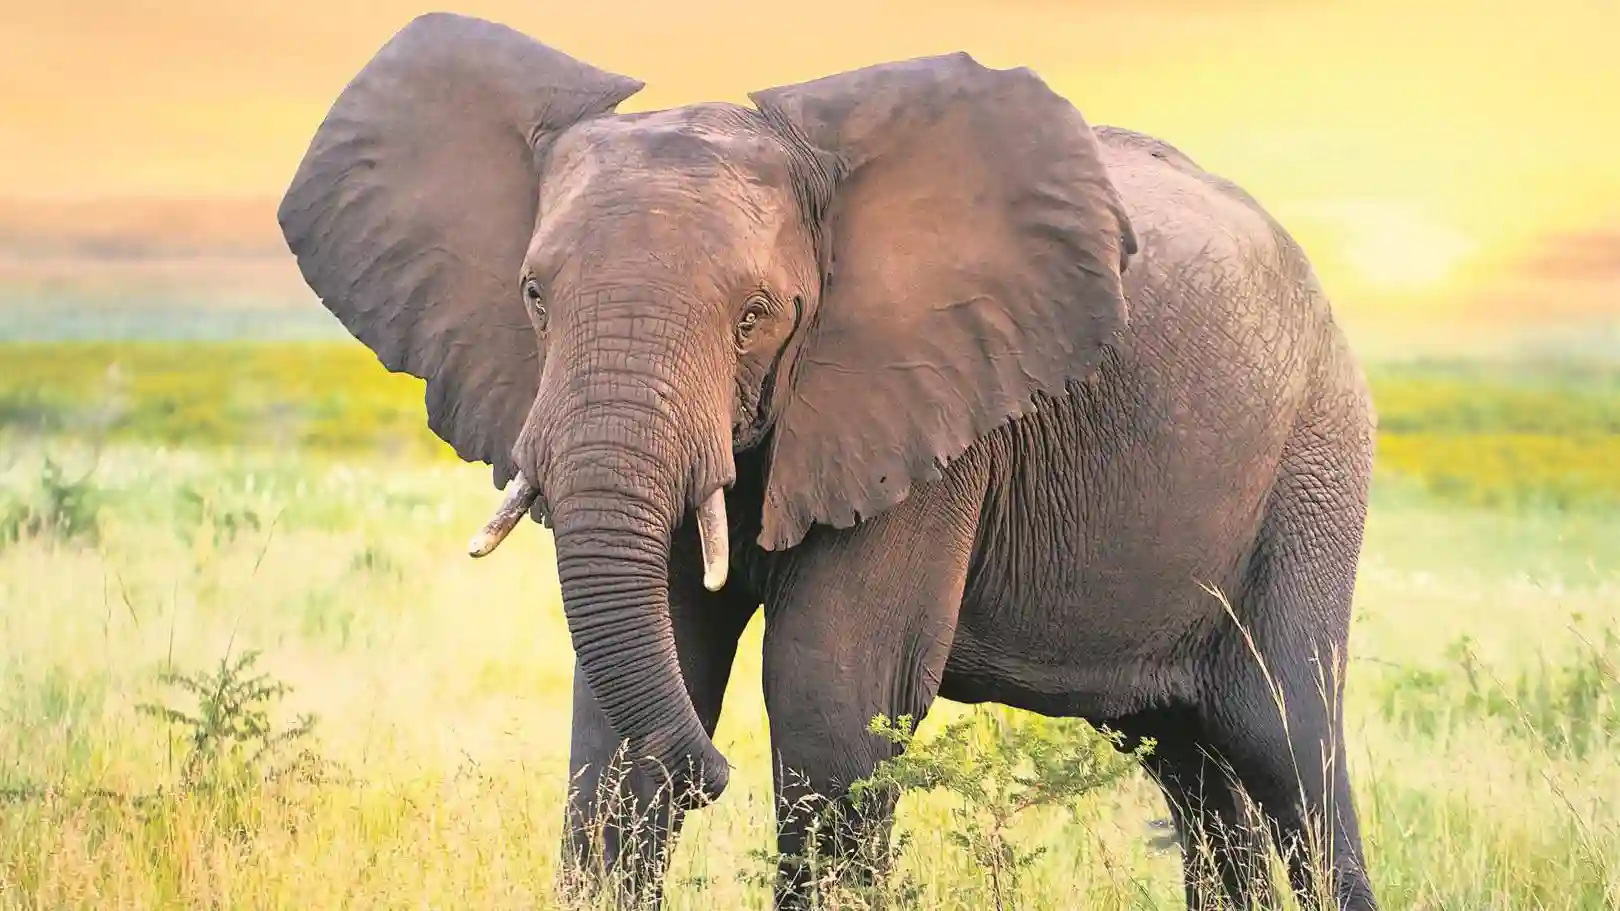 Victoria Falls Bartender Trampled To Death By Elephant